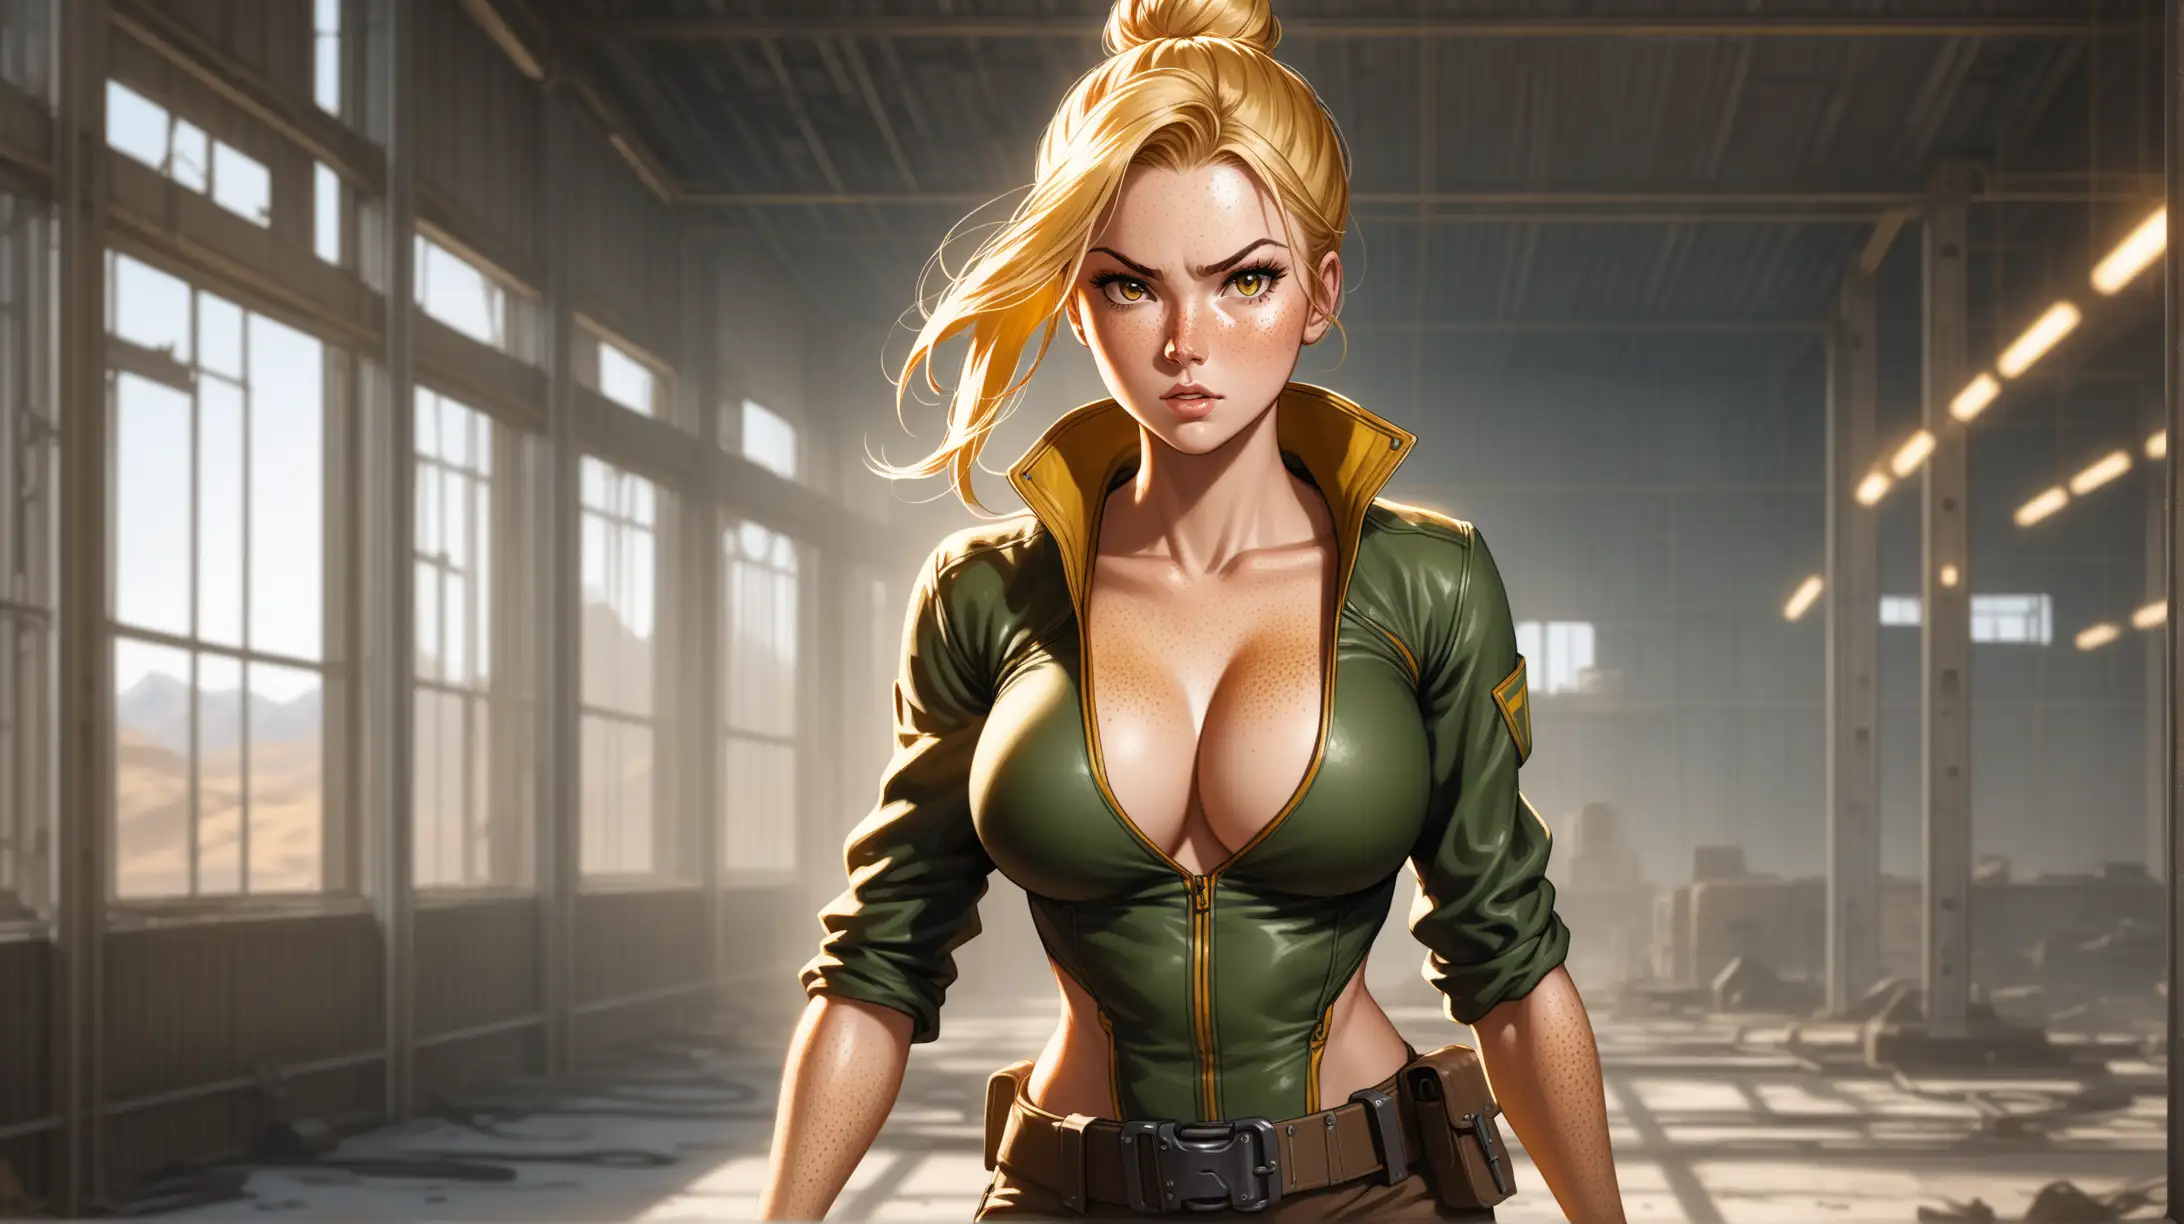 Draw a woman, long blonde hair in a bun, gold eyes, freckles, perky figure, outfit inspired from Fallout, high quality, cowboy shot, indoors, dynamic pose, seductive, natural lighting, determined expression